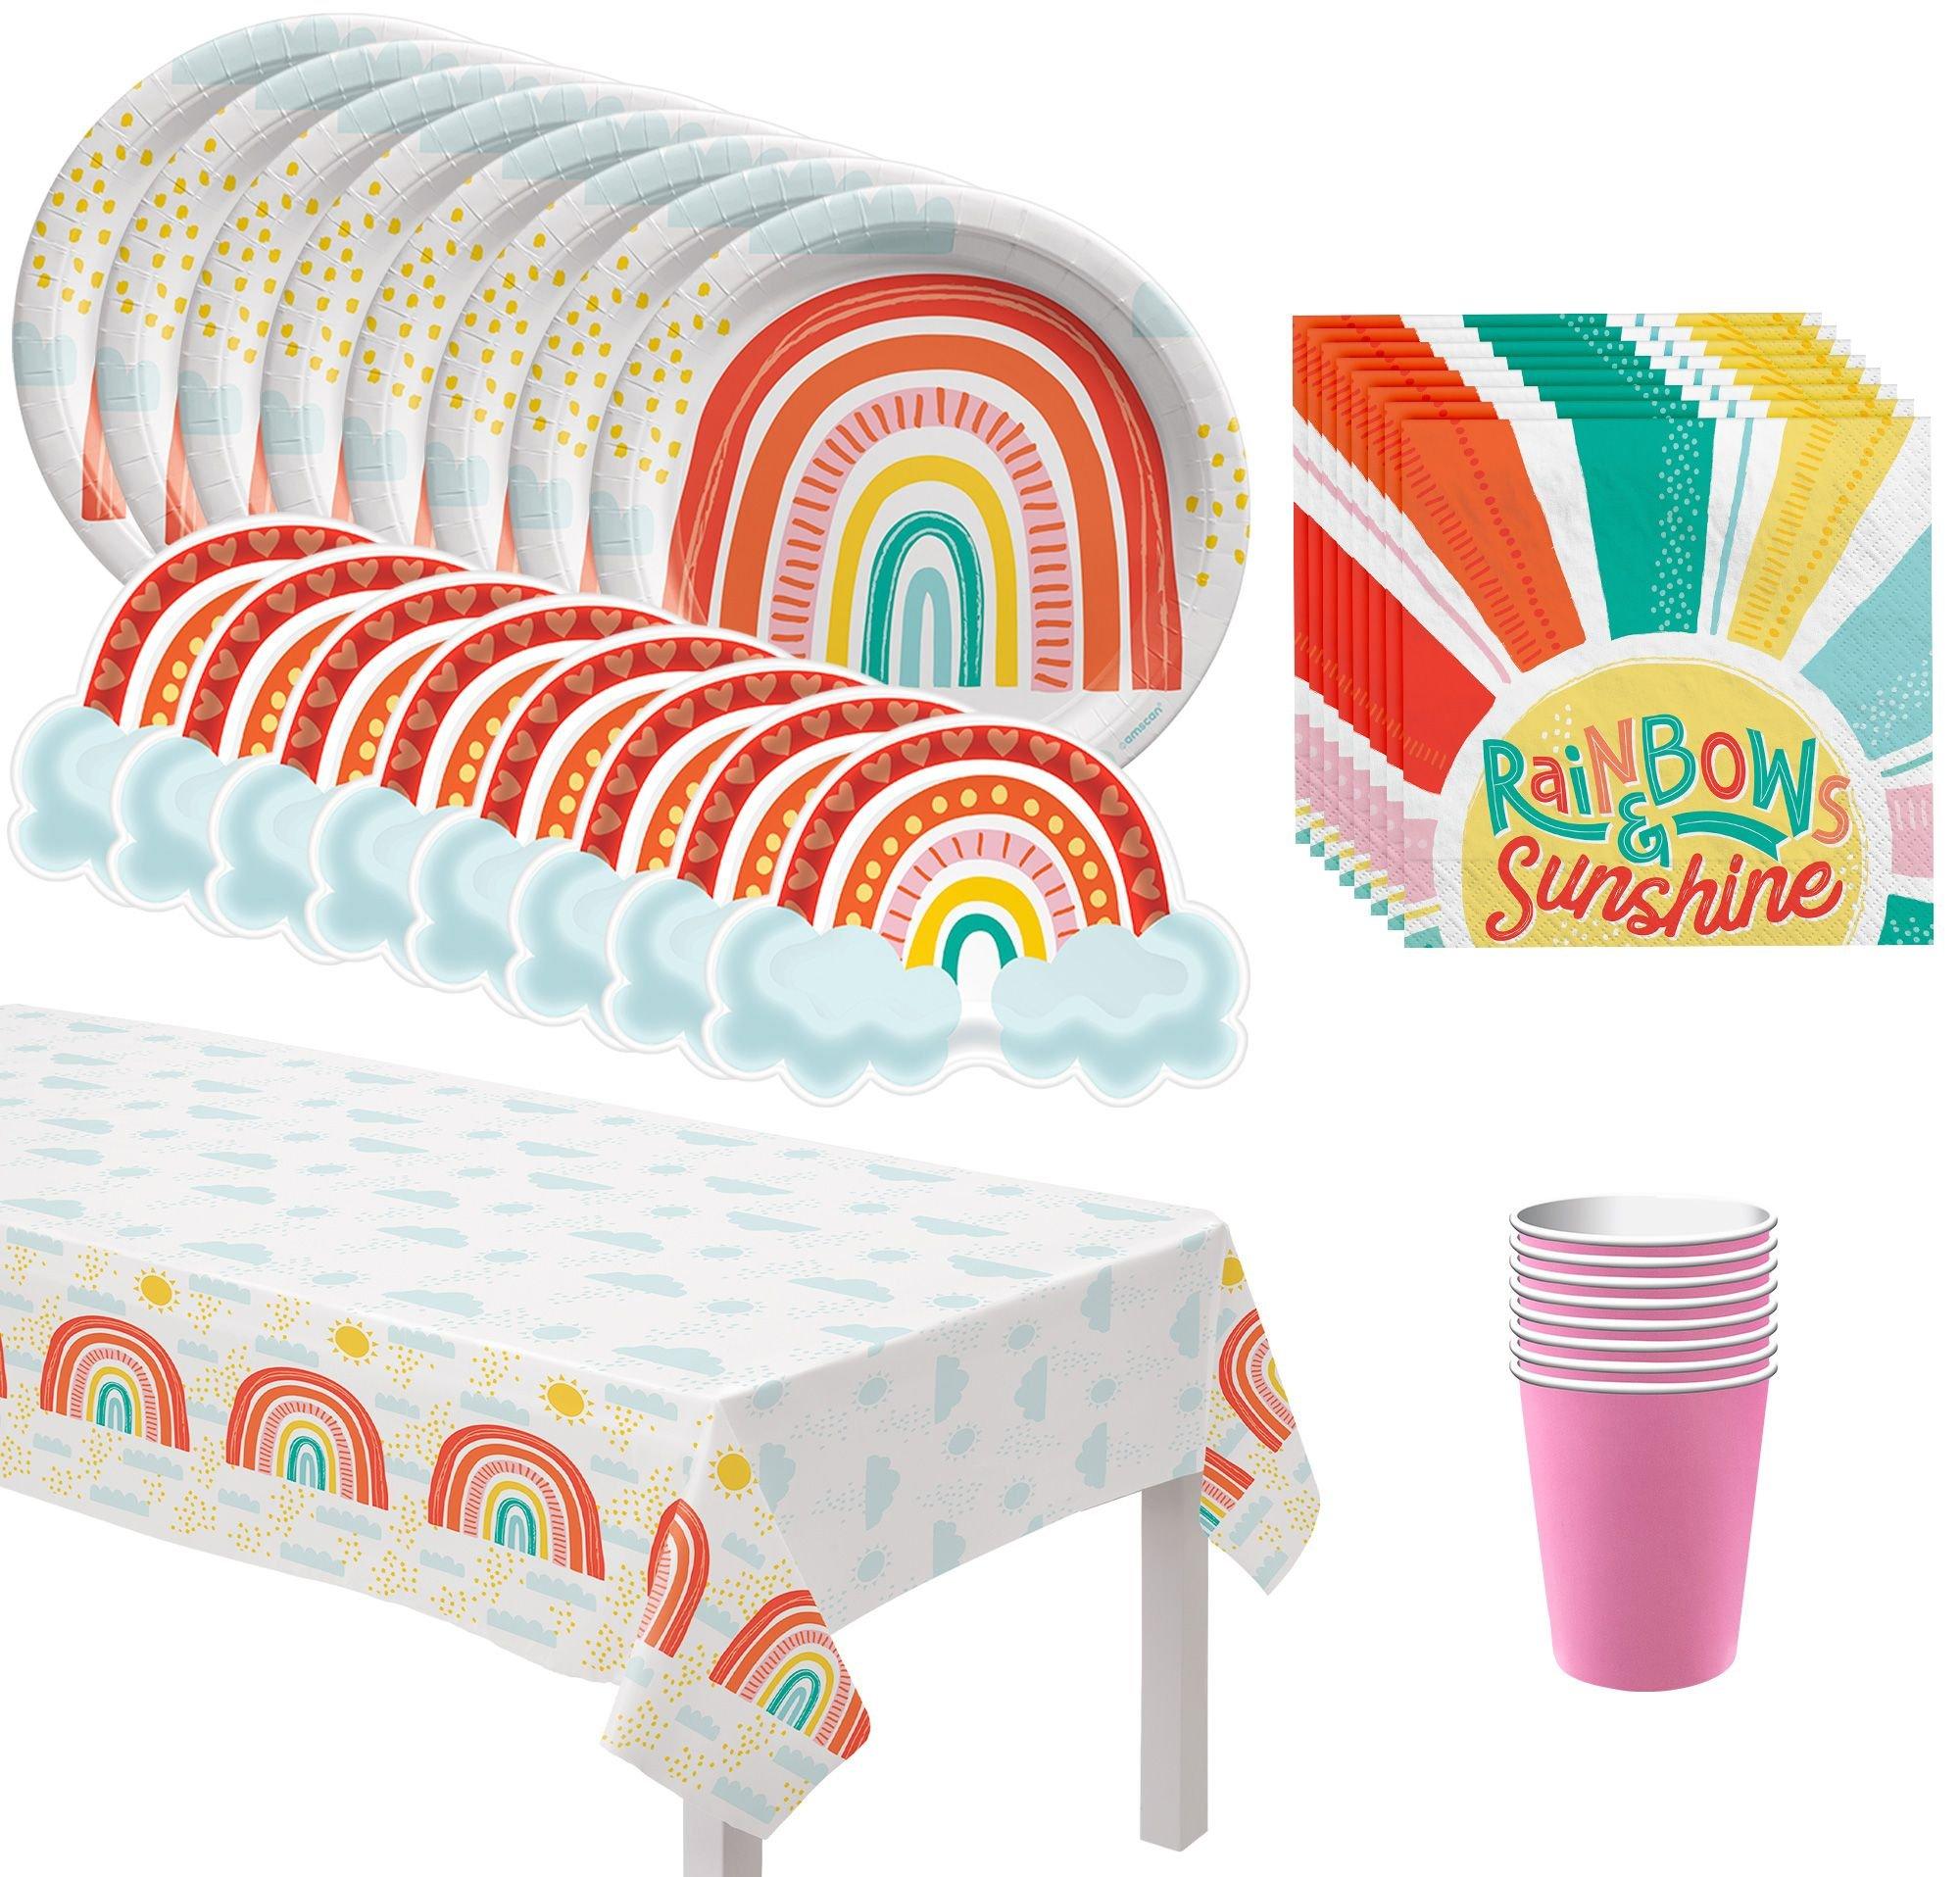 Retro Rainbow Party Supplies Pack for 8 Guests - Kit Includes Plates, Napkins, Cups & Table Cover